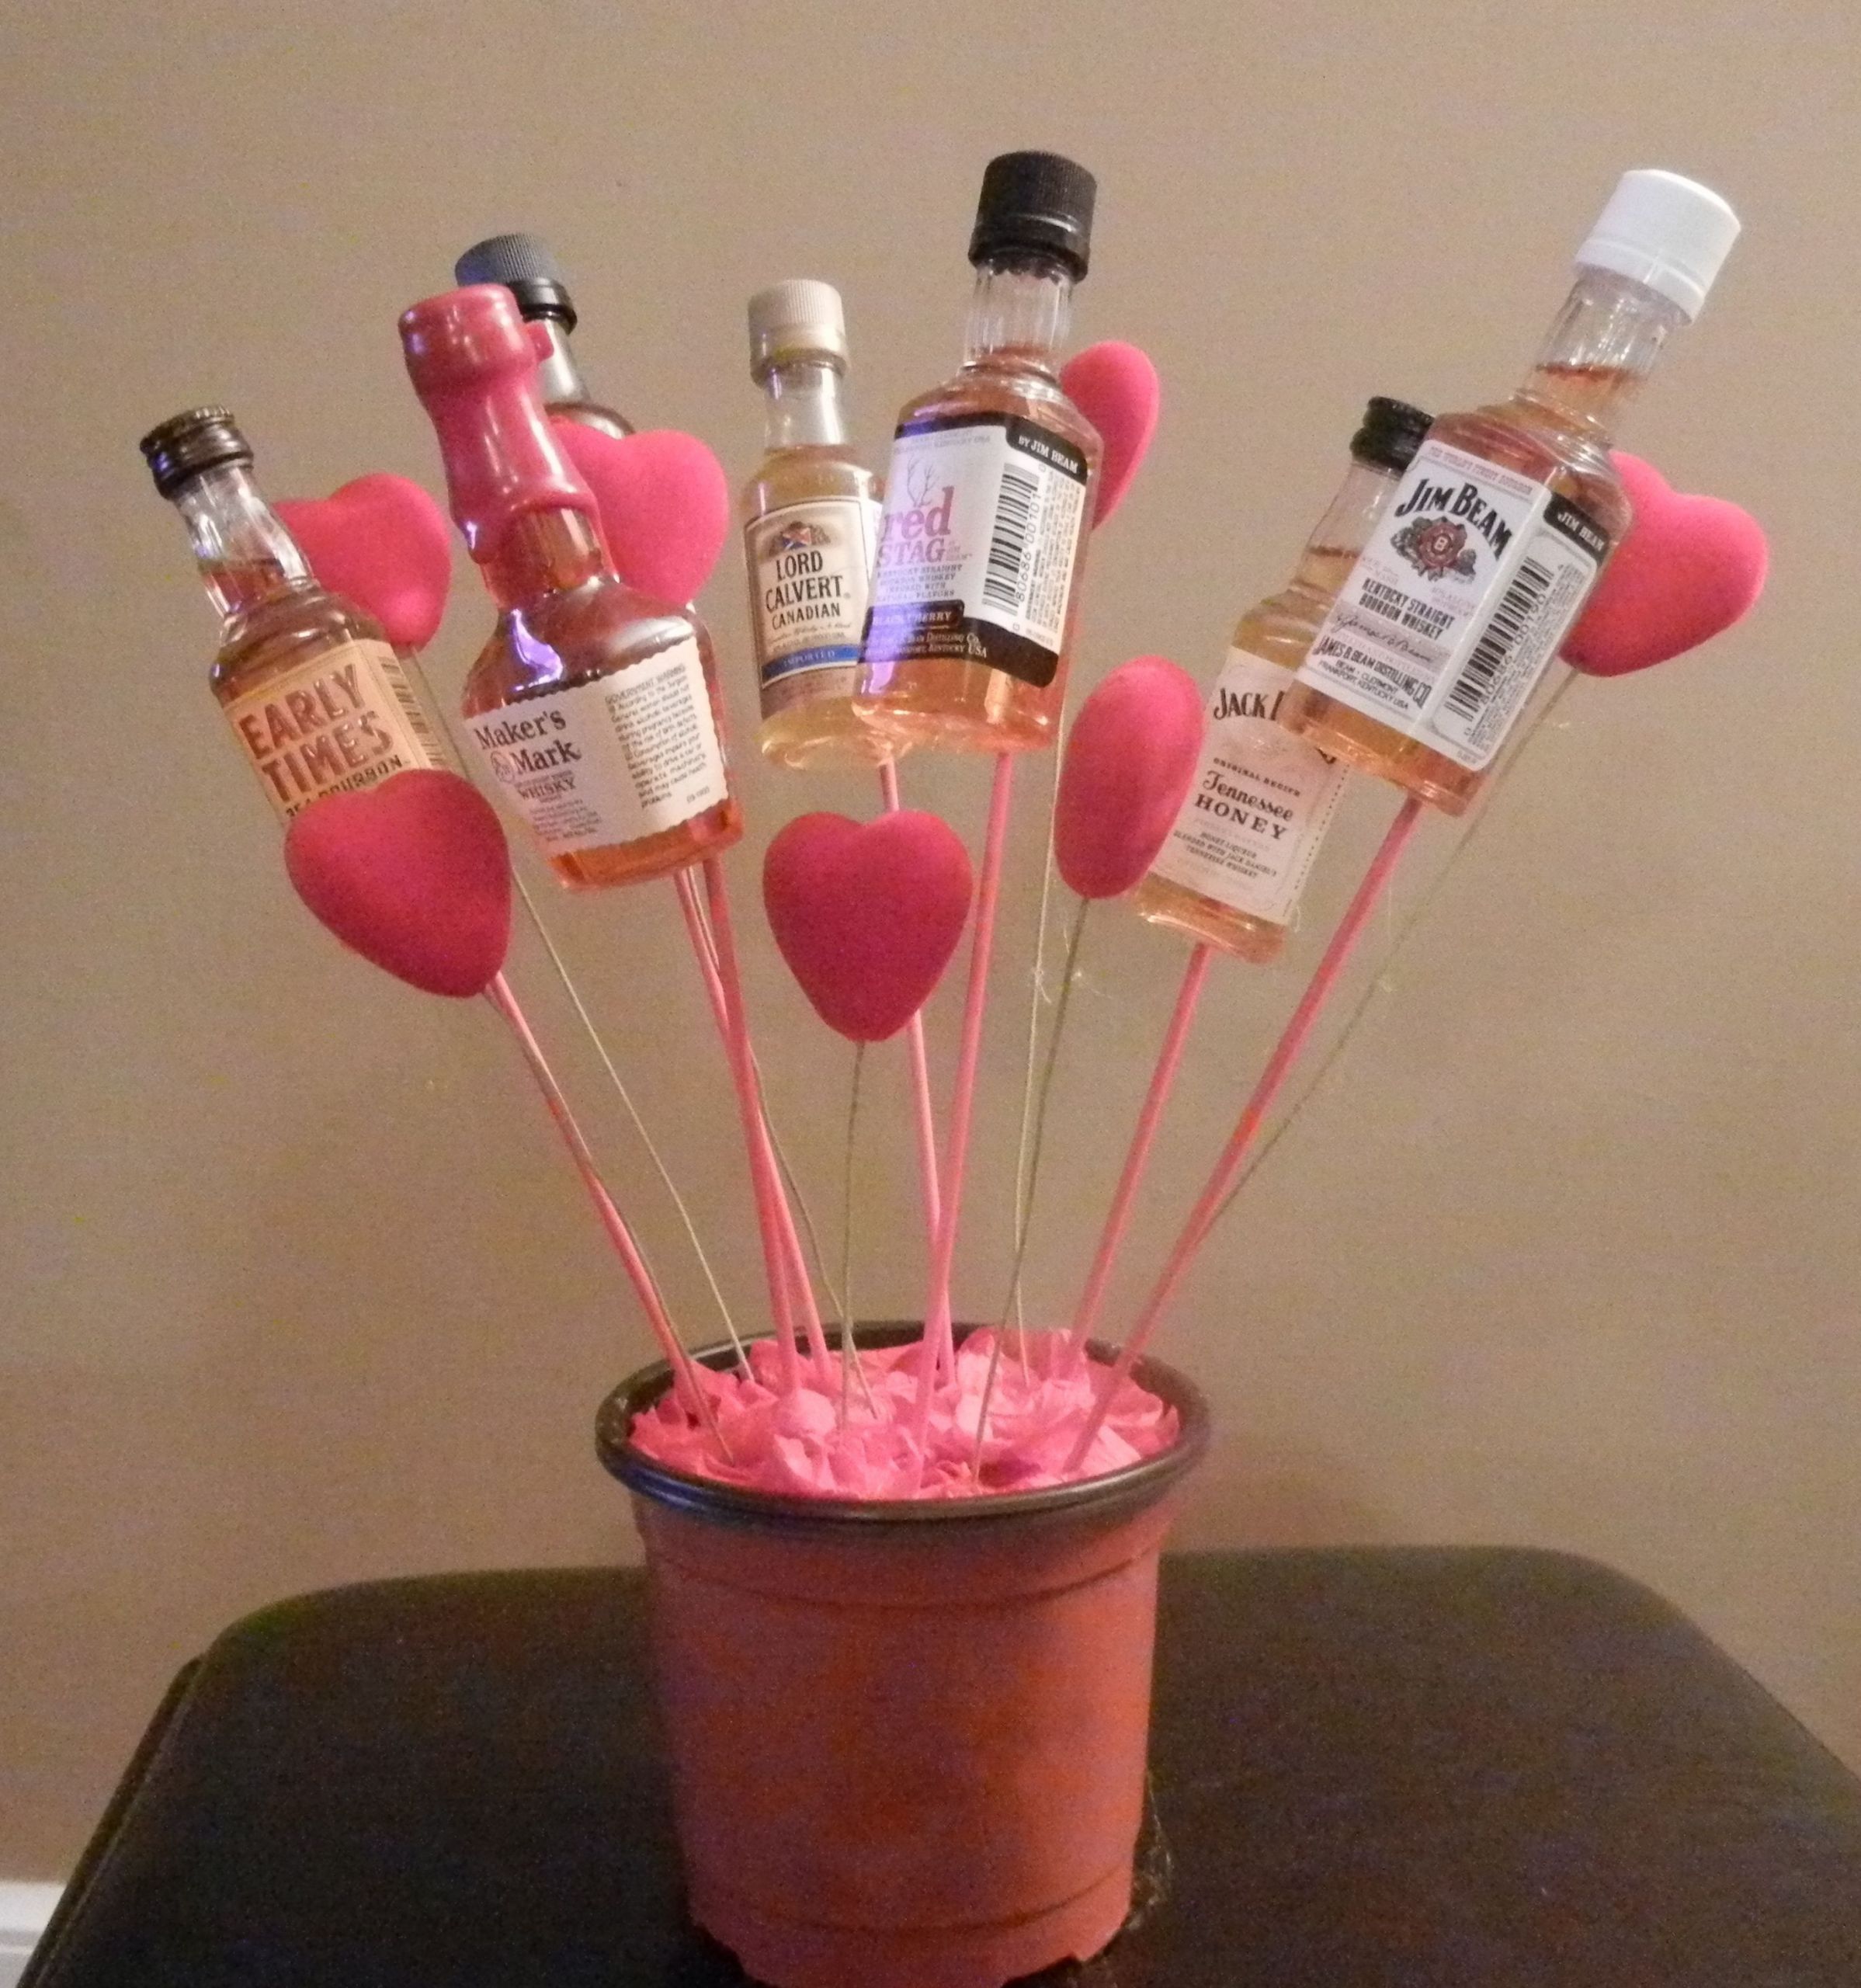 Valentines Gift Ideas For Husbands
 My Husband s Valentine Gift a "Man Bouquet"